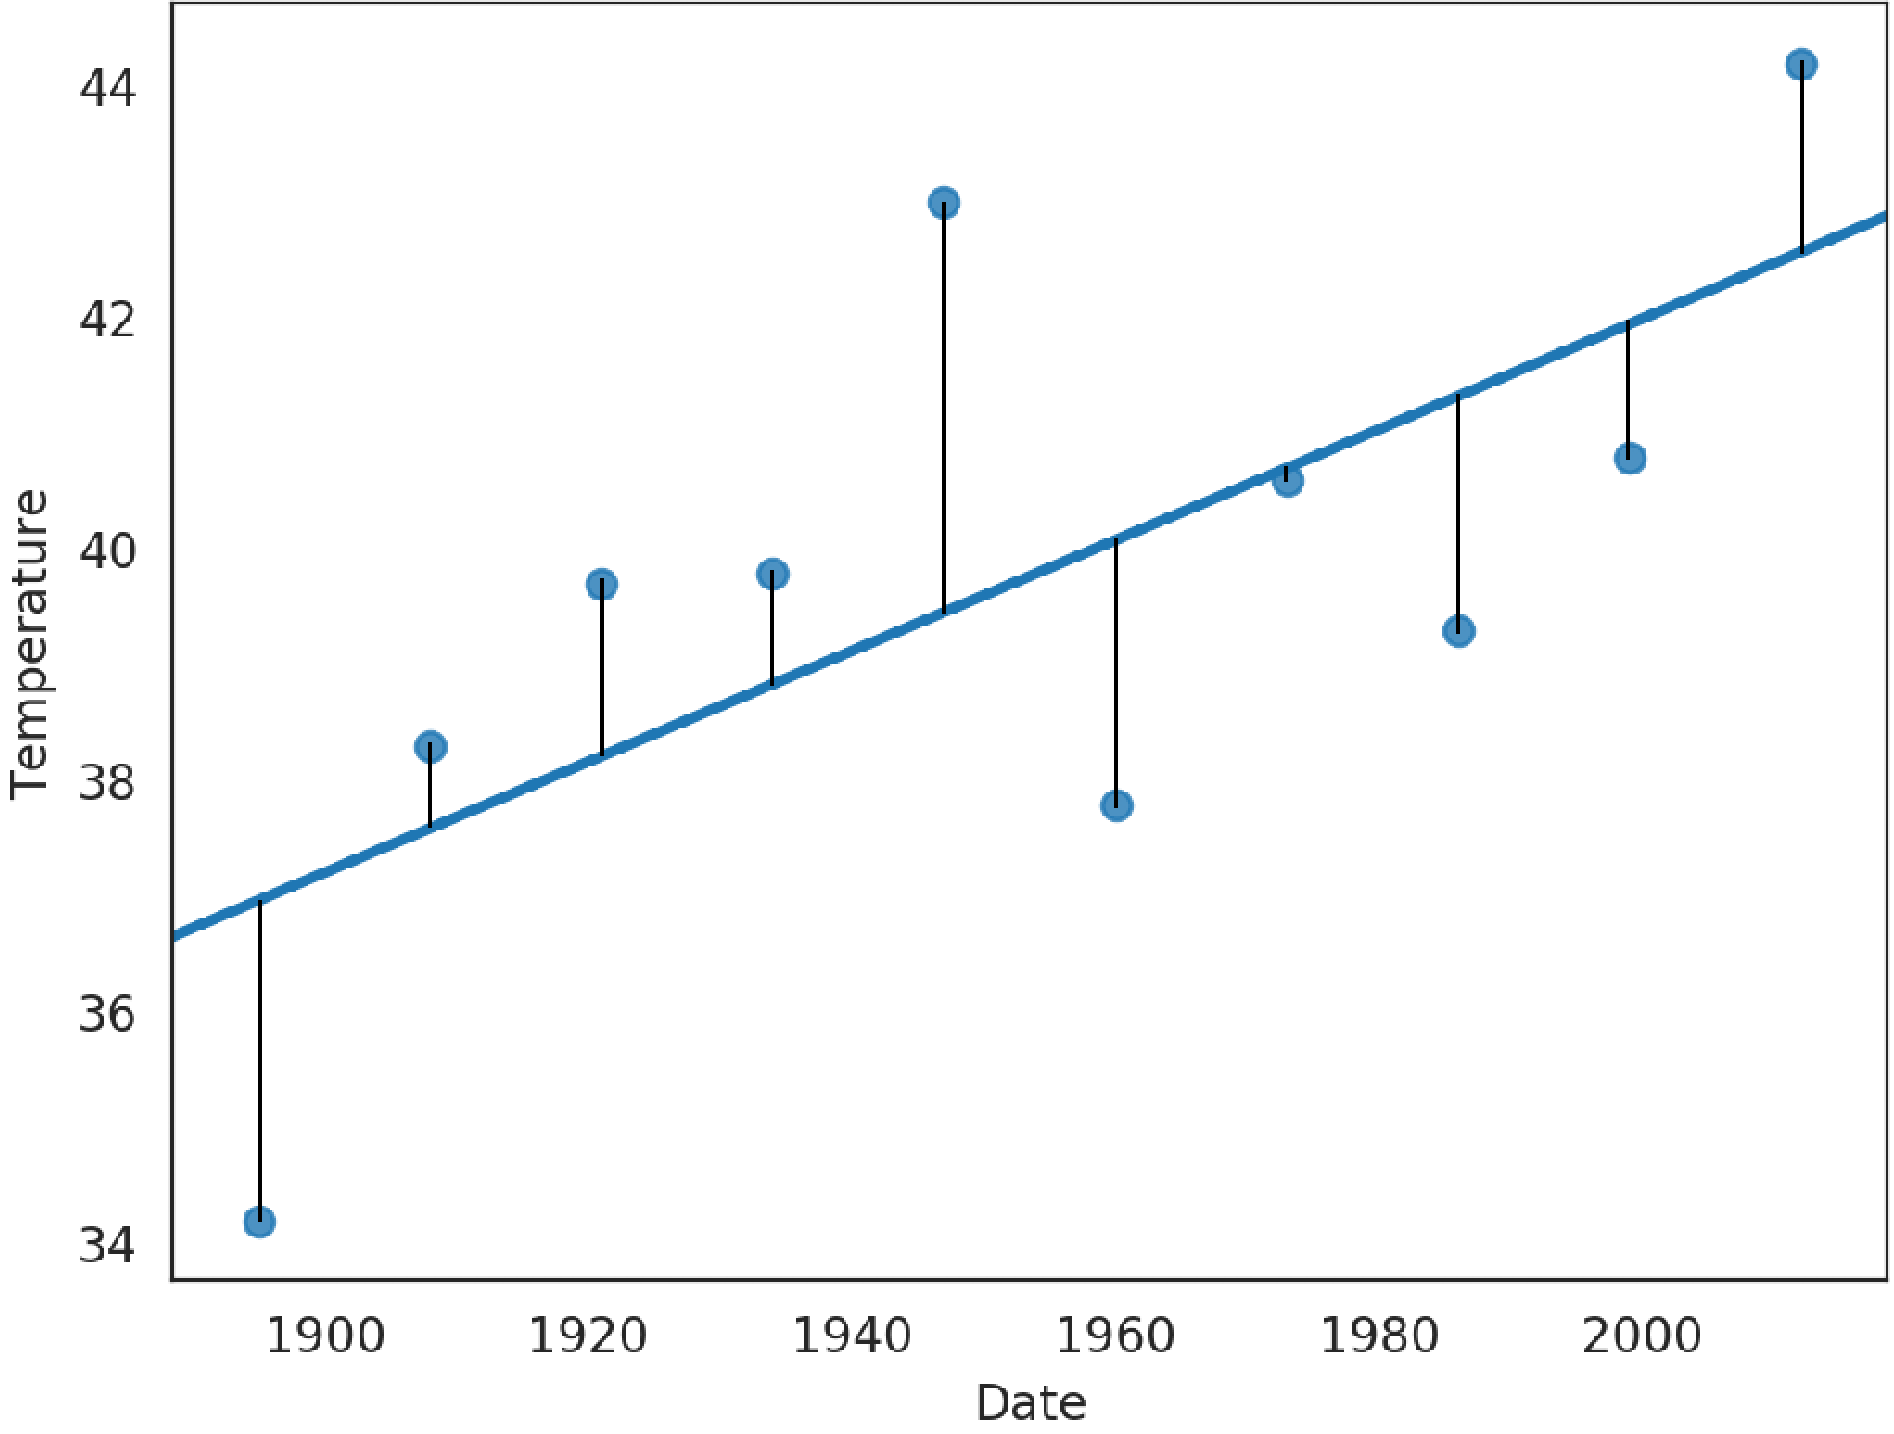 A few time series data points and a regression line